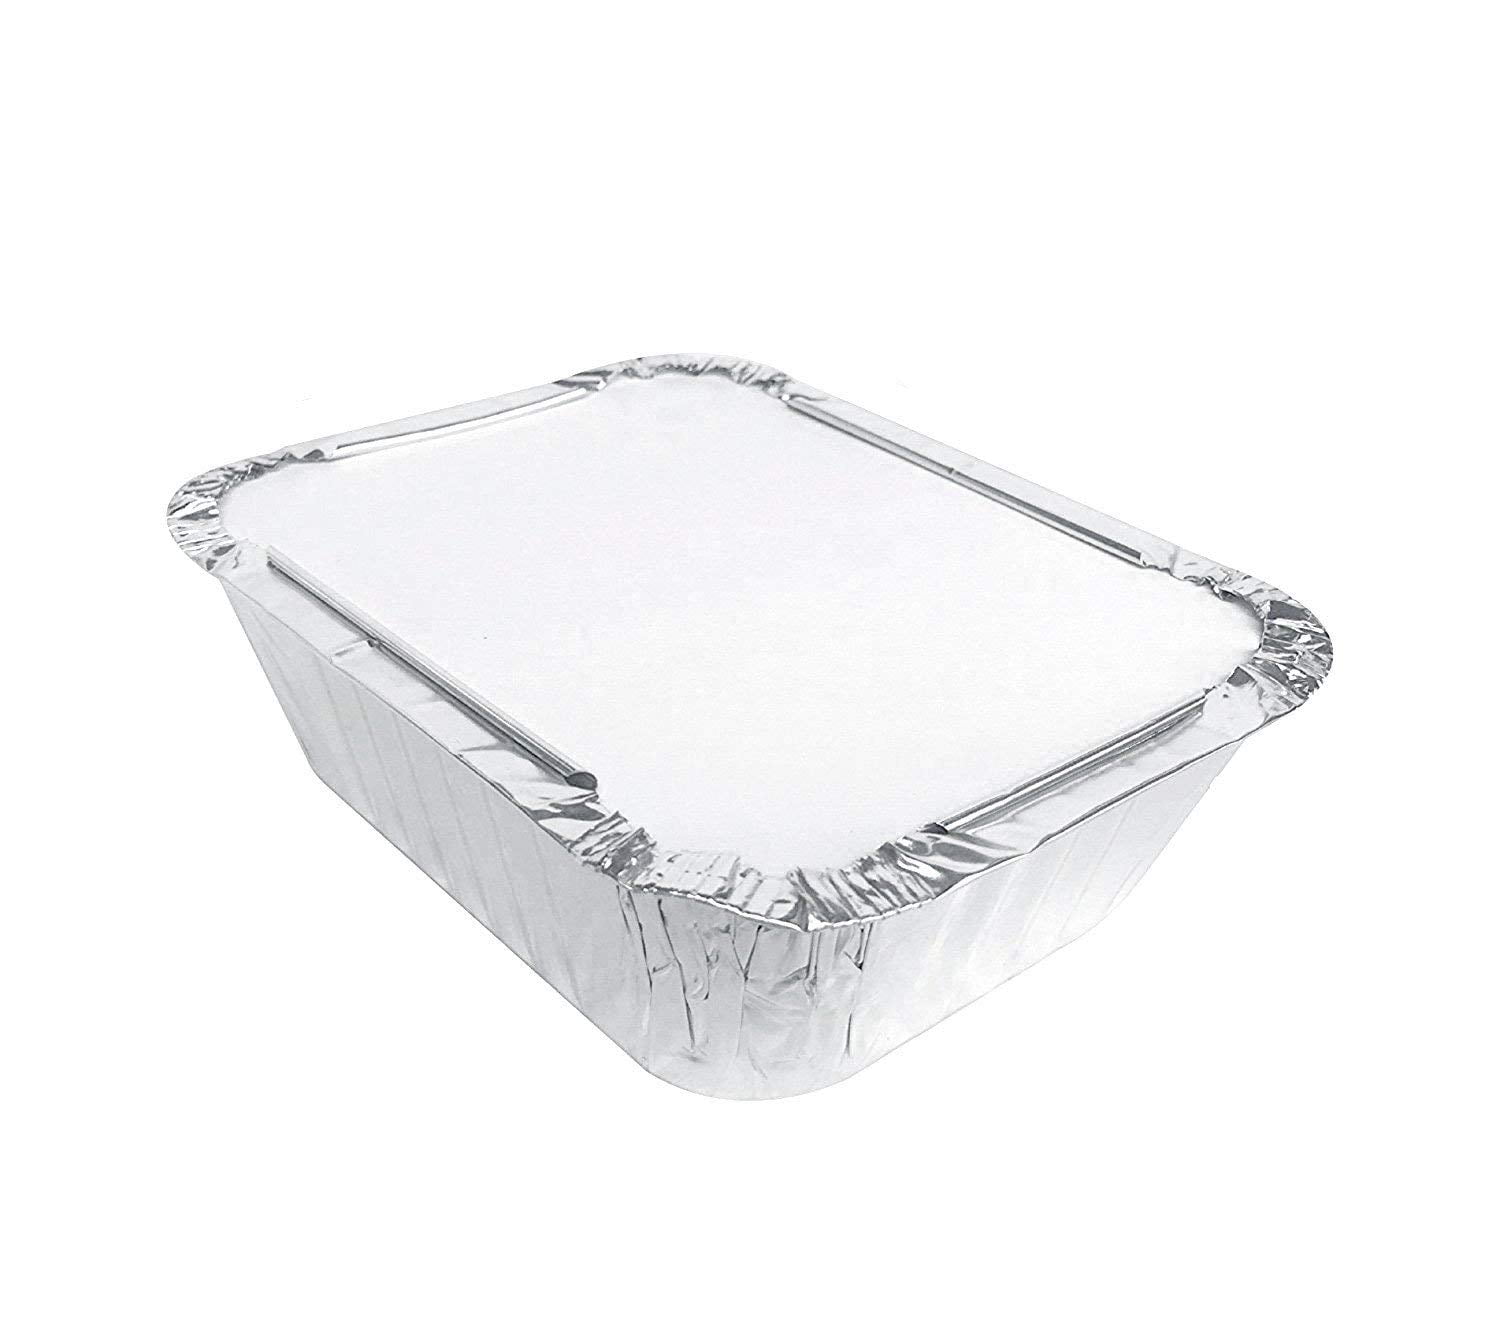 100 x NEW SQUARE Aluminium Foil Tray 6 X 6 with LIDS Disposable dishes  Baking